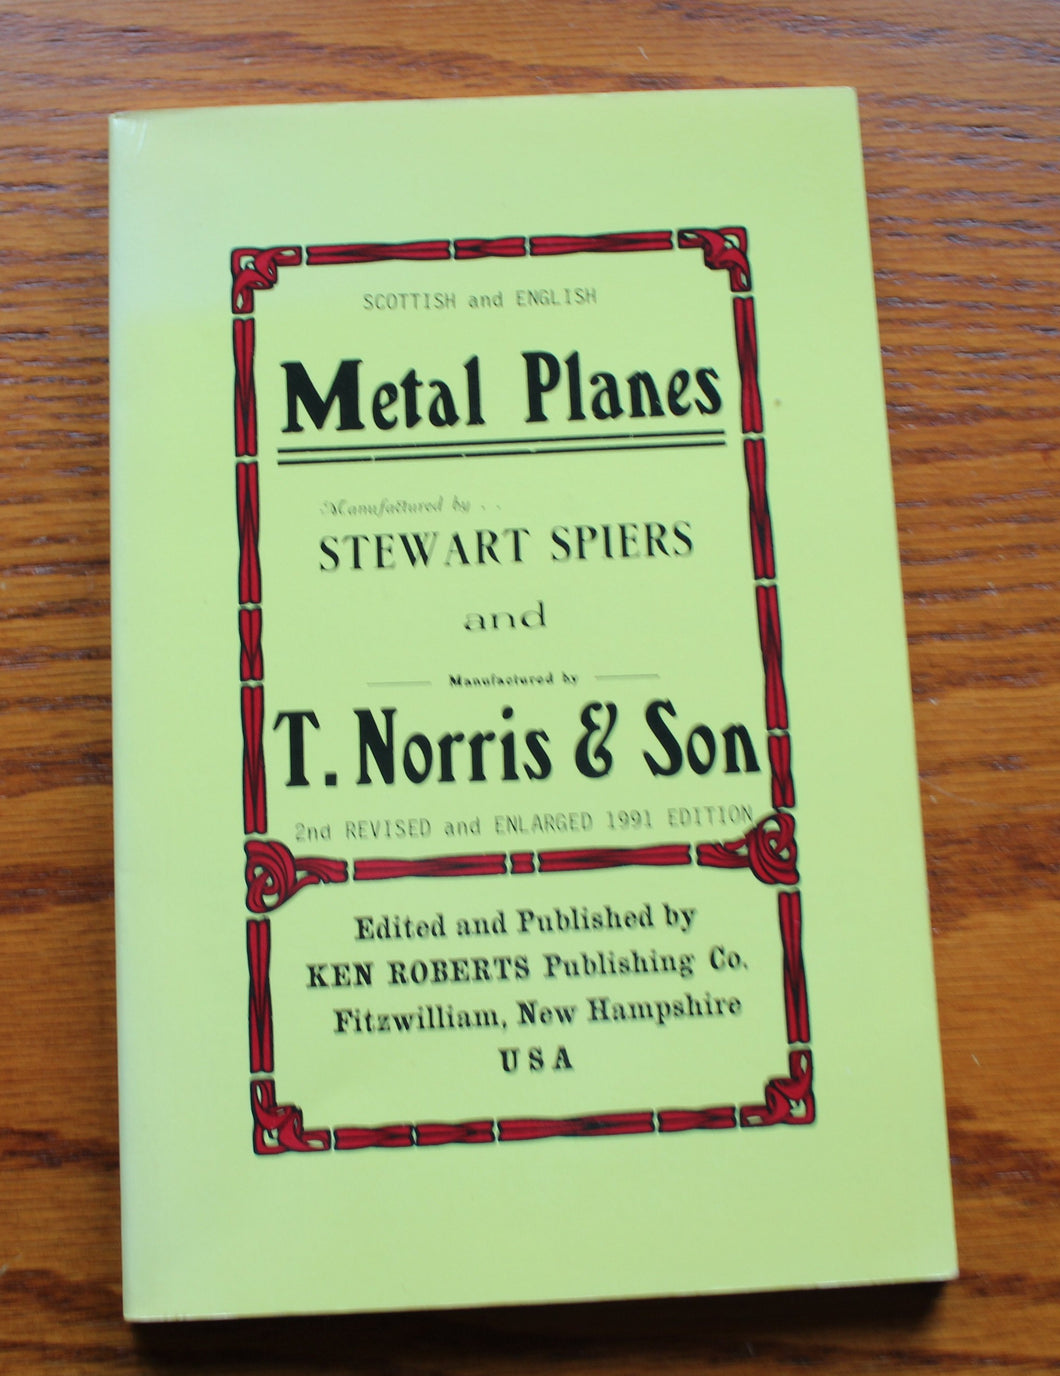 Scottish and English Metal Planes by Steward Spiers and T. Norris Metal Planes